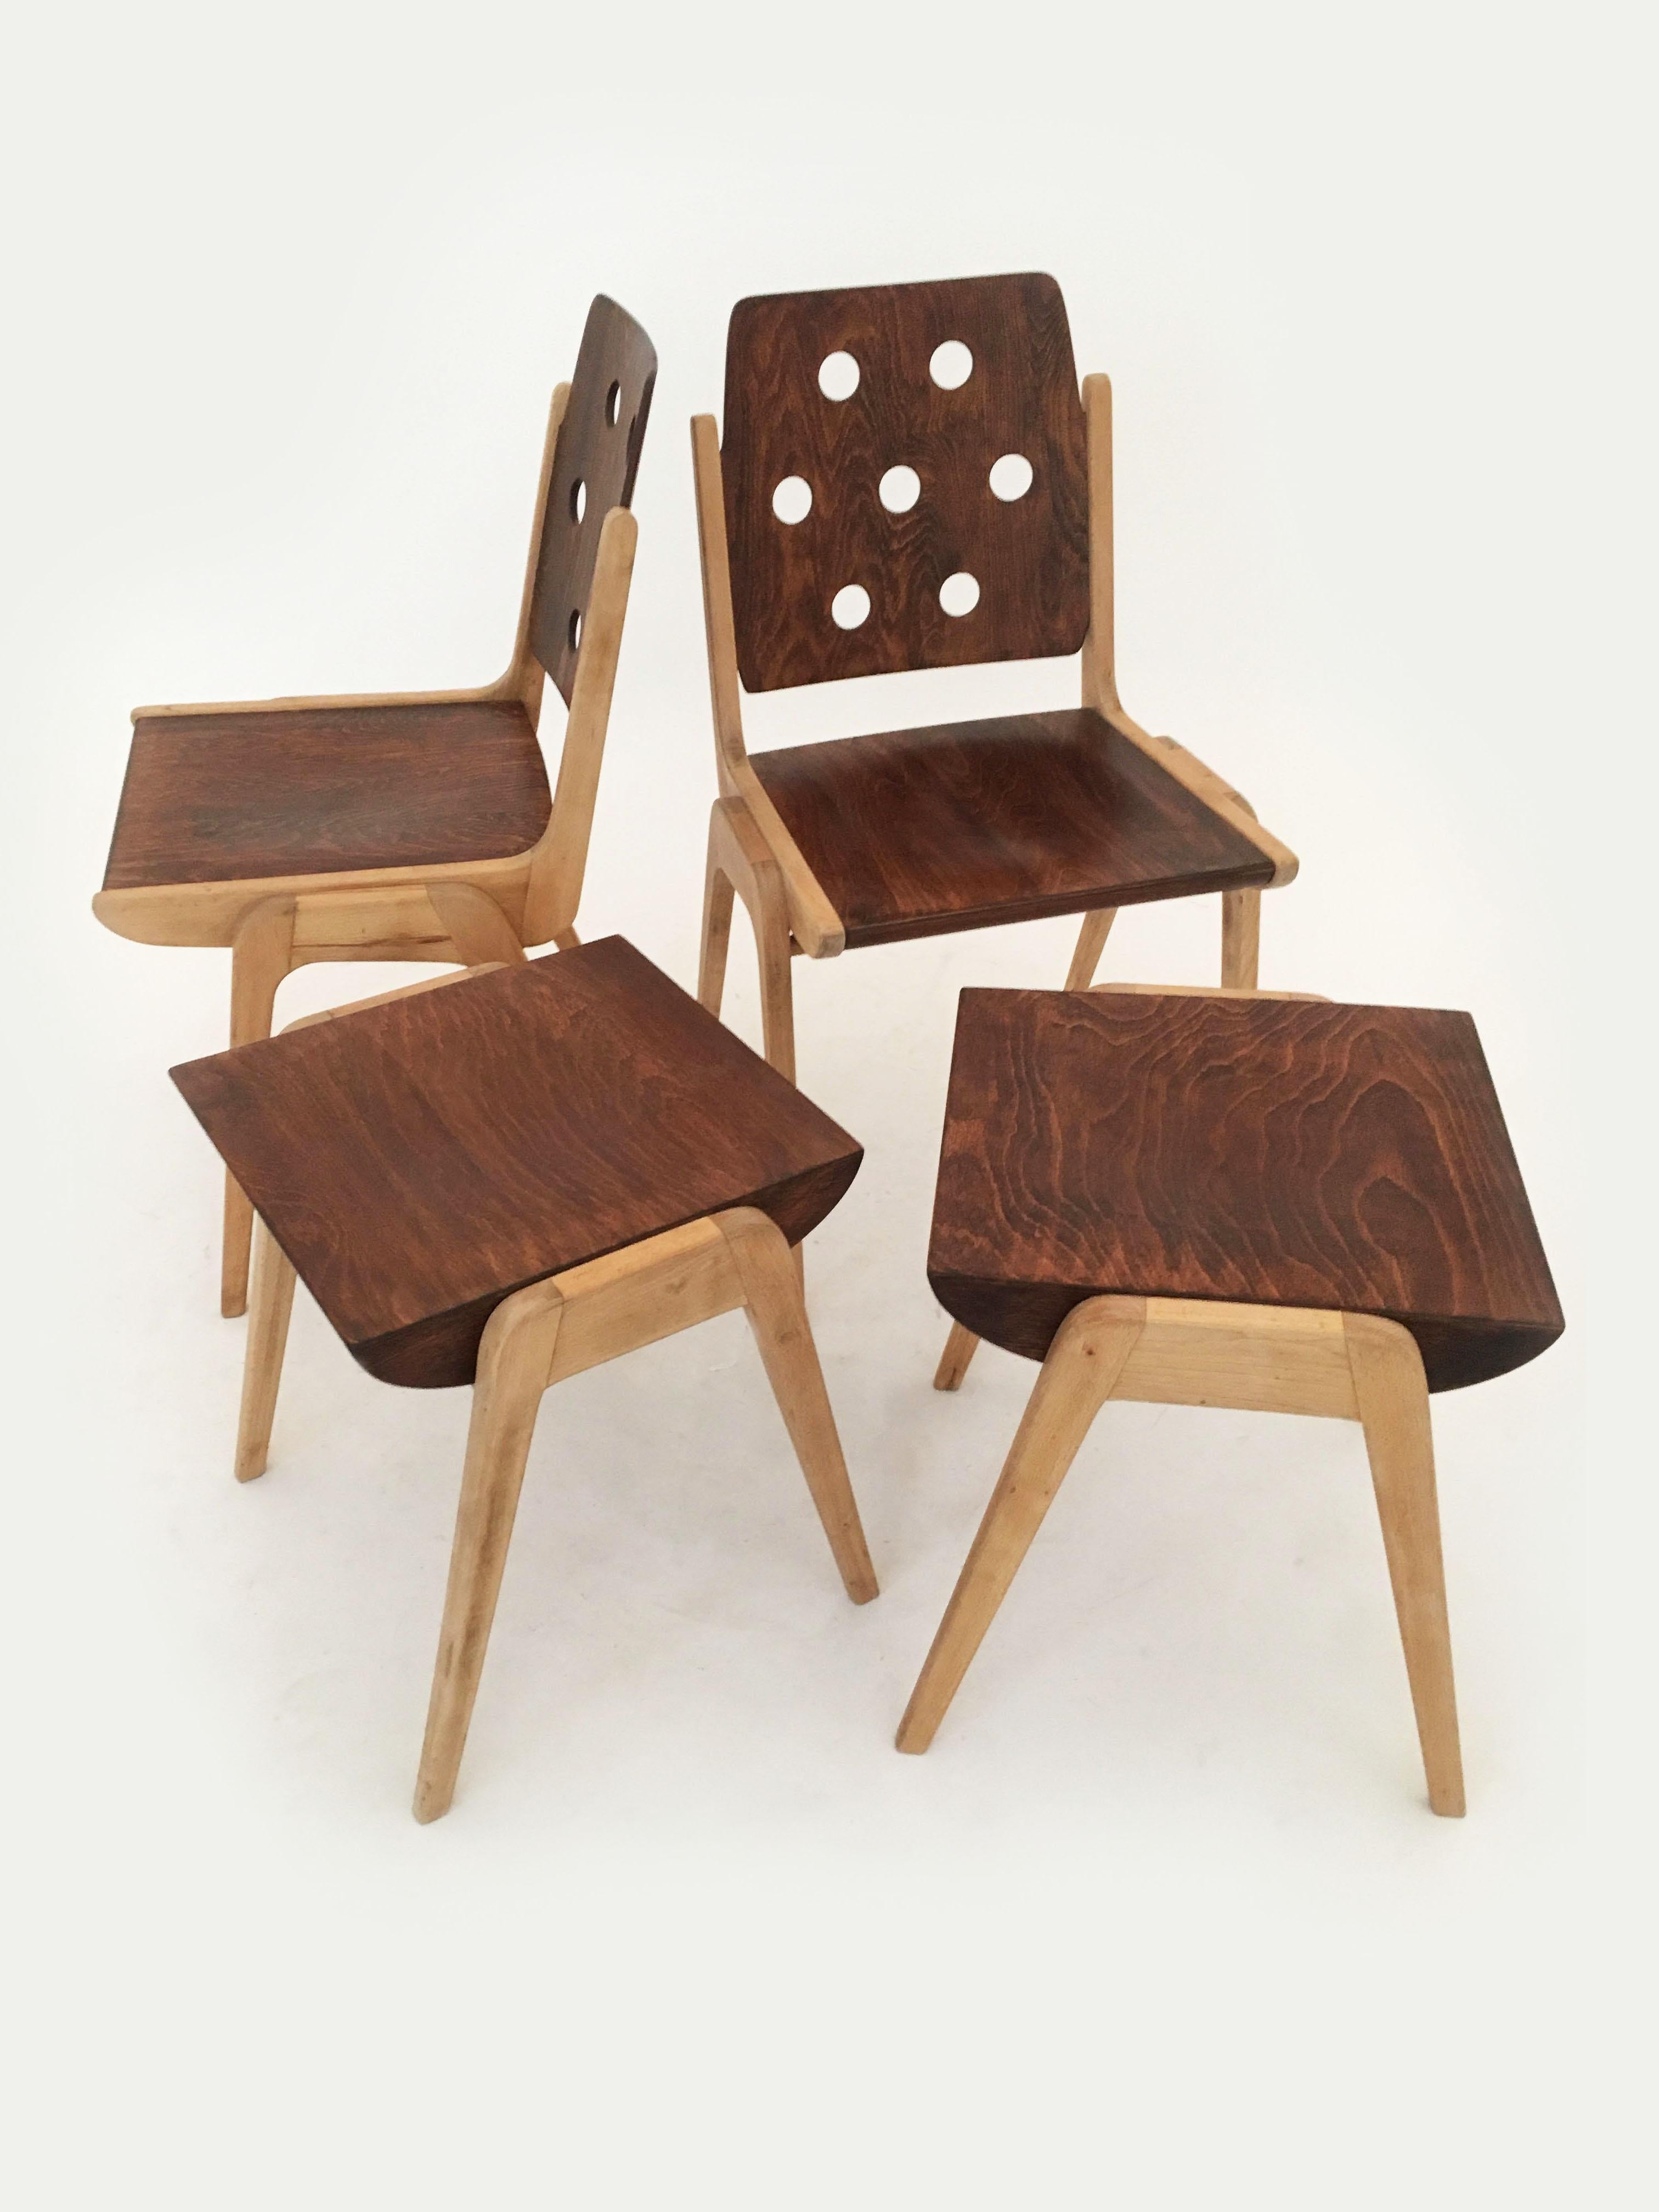 Set of Four Stacking Chairs Franz Schuster, Duo-Colored, Austria 1950s For Sale 9